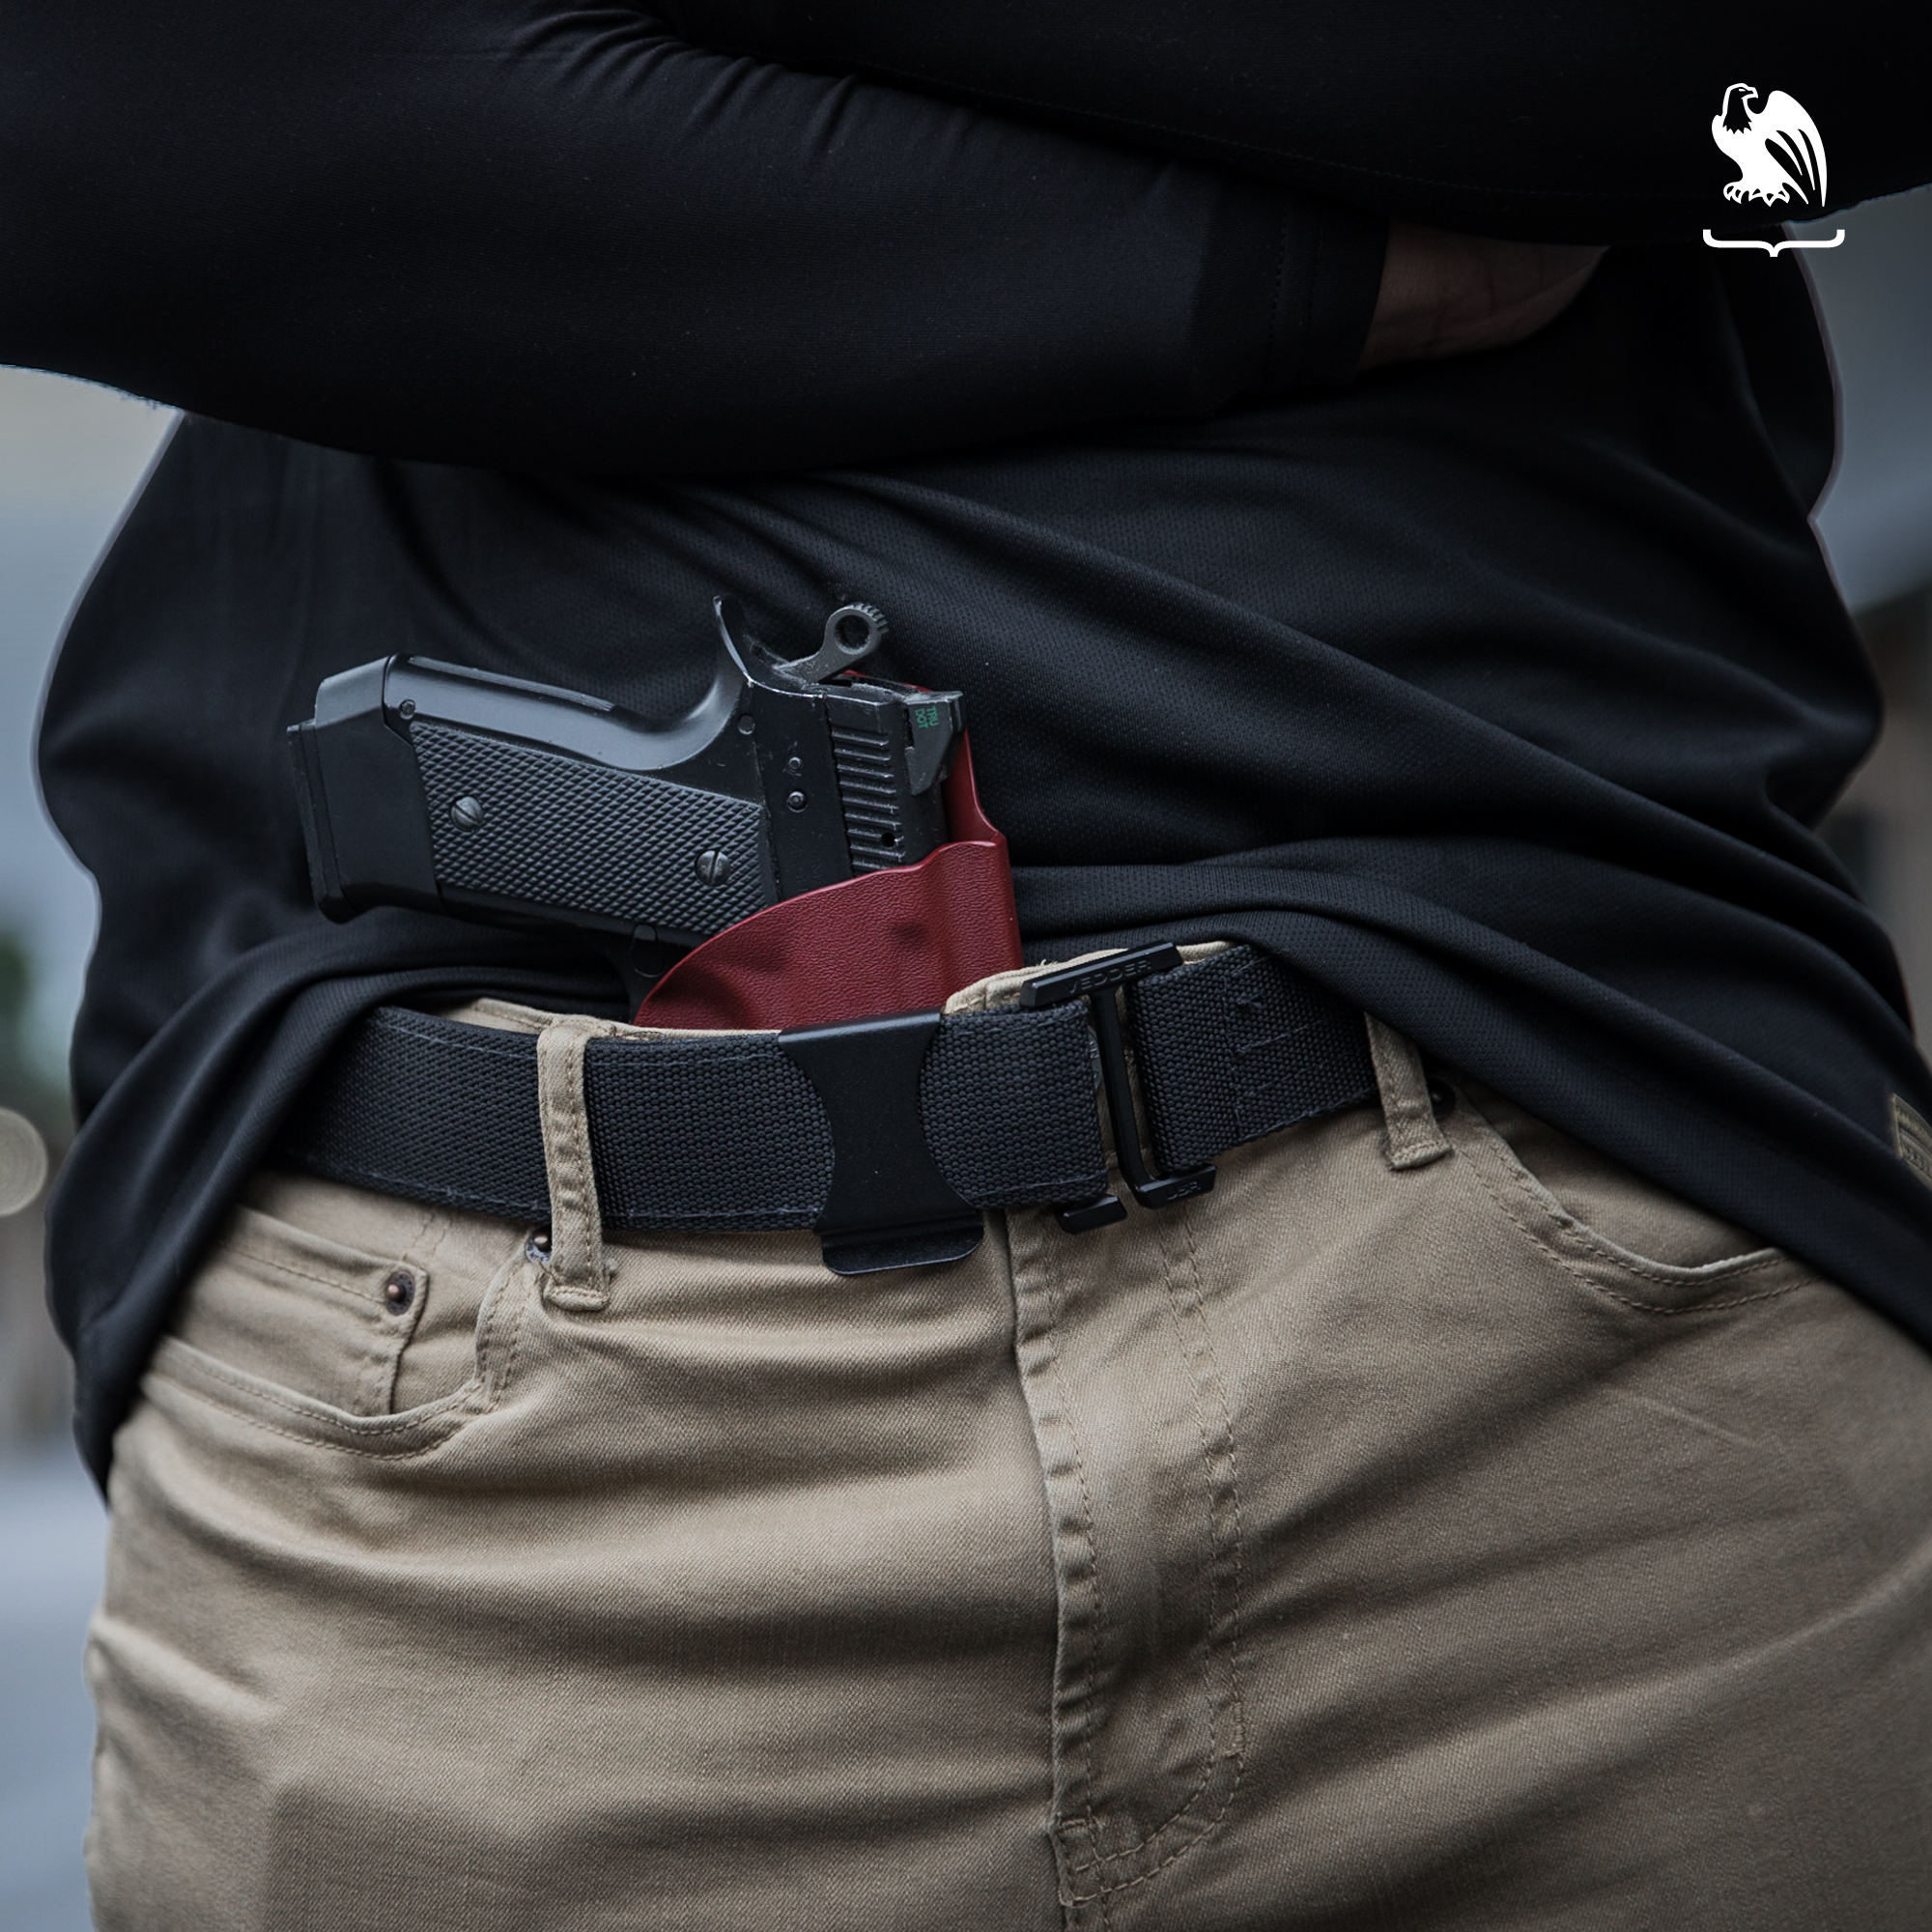 Are colored holsters harder to concealed? Does color make a holster stand out too much? 